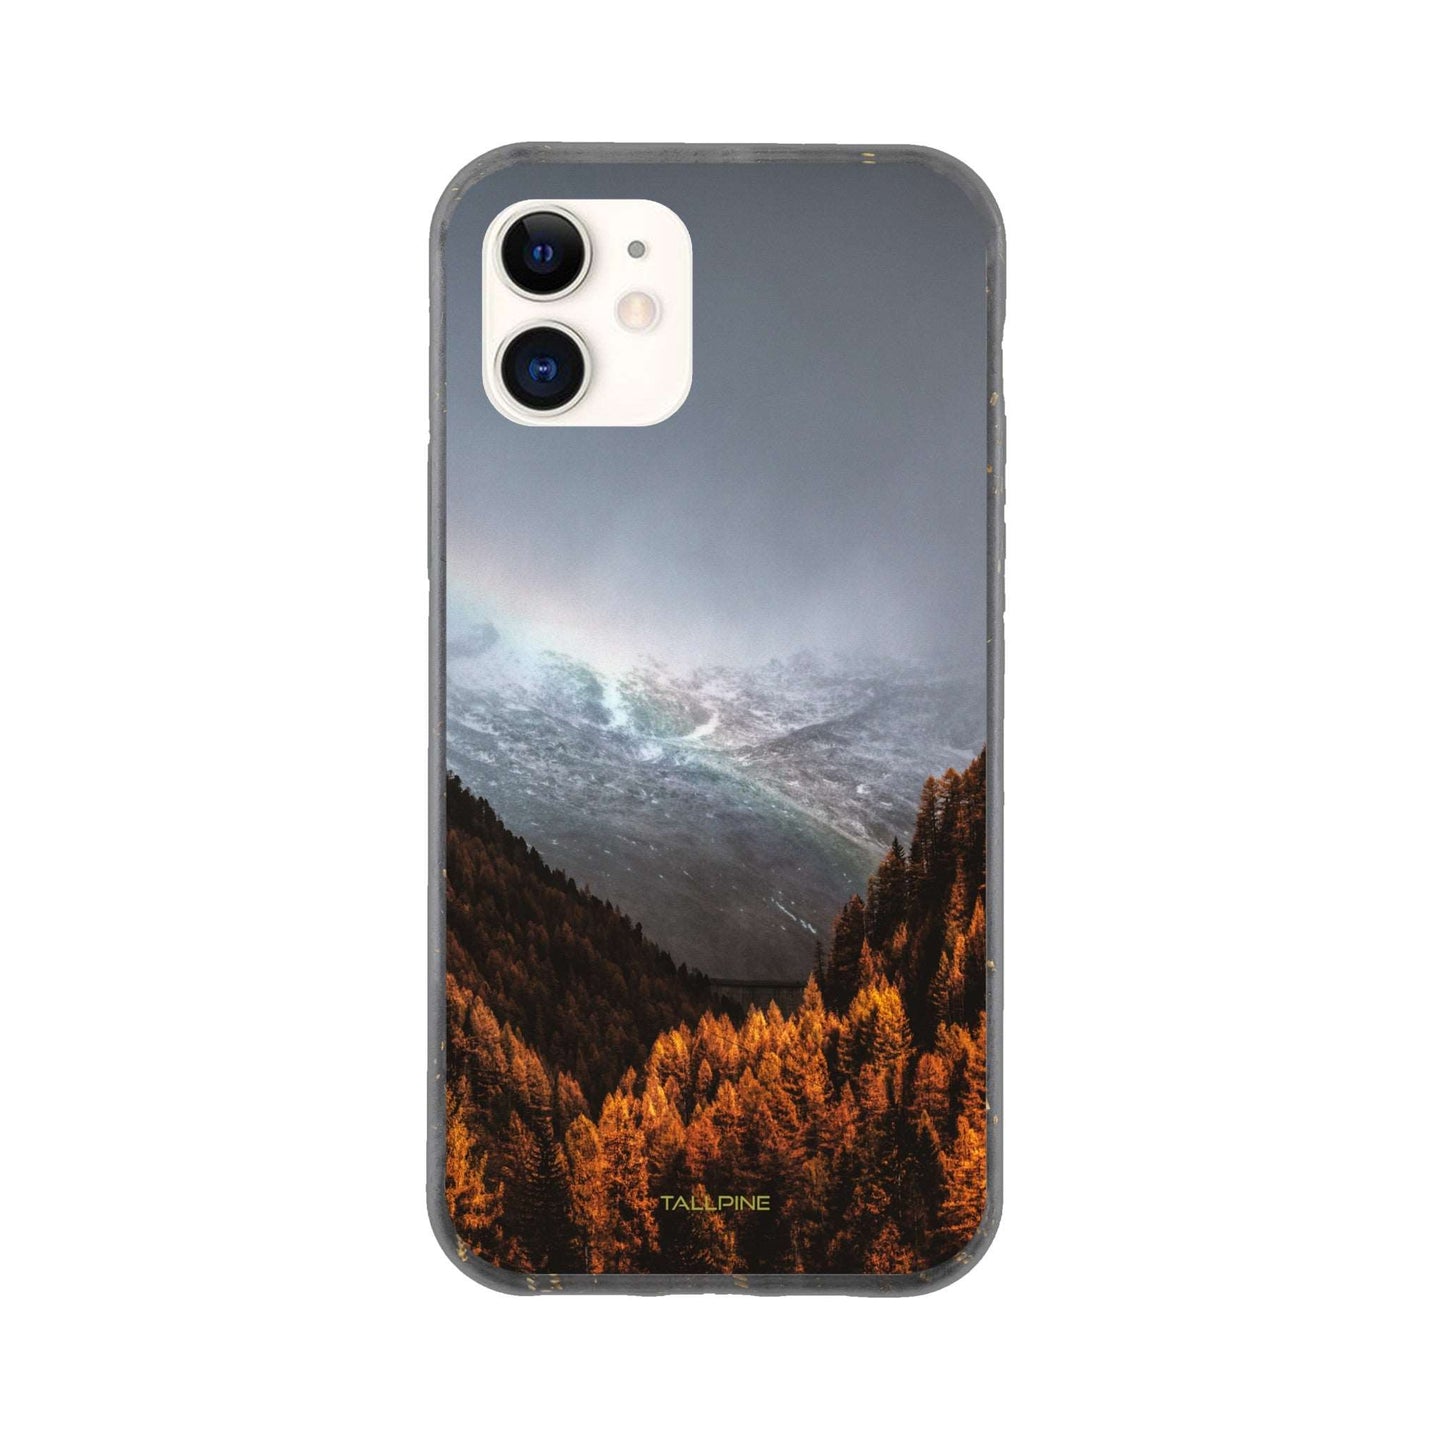 Autumn Mountain - Eco Case iPhone 12 - Tallpine Cases | Sustainable and Eco-Friendly Phone Cases - Autumn Mountain Nature